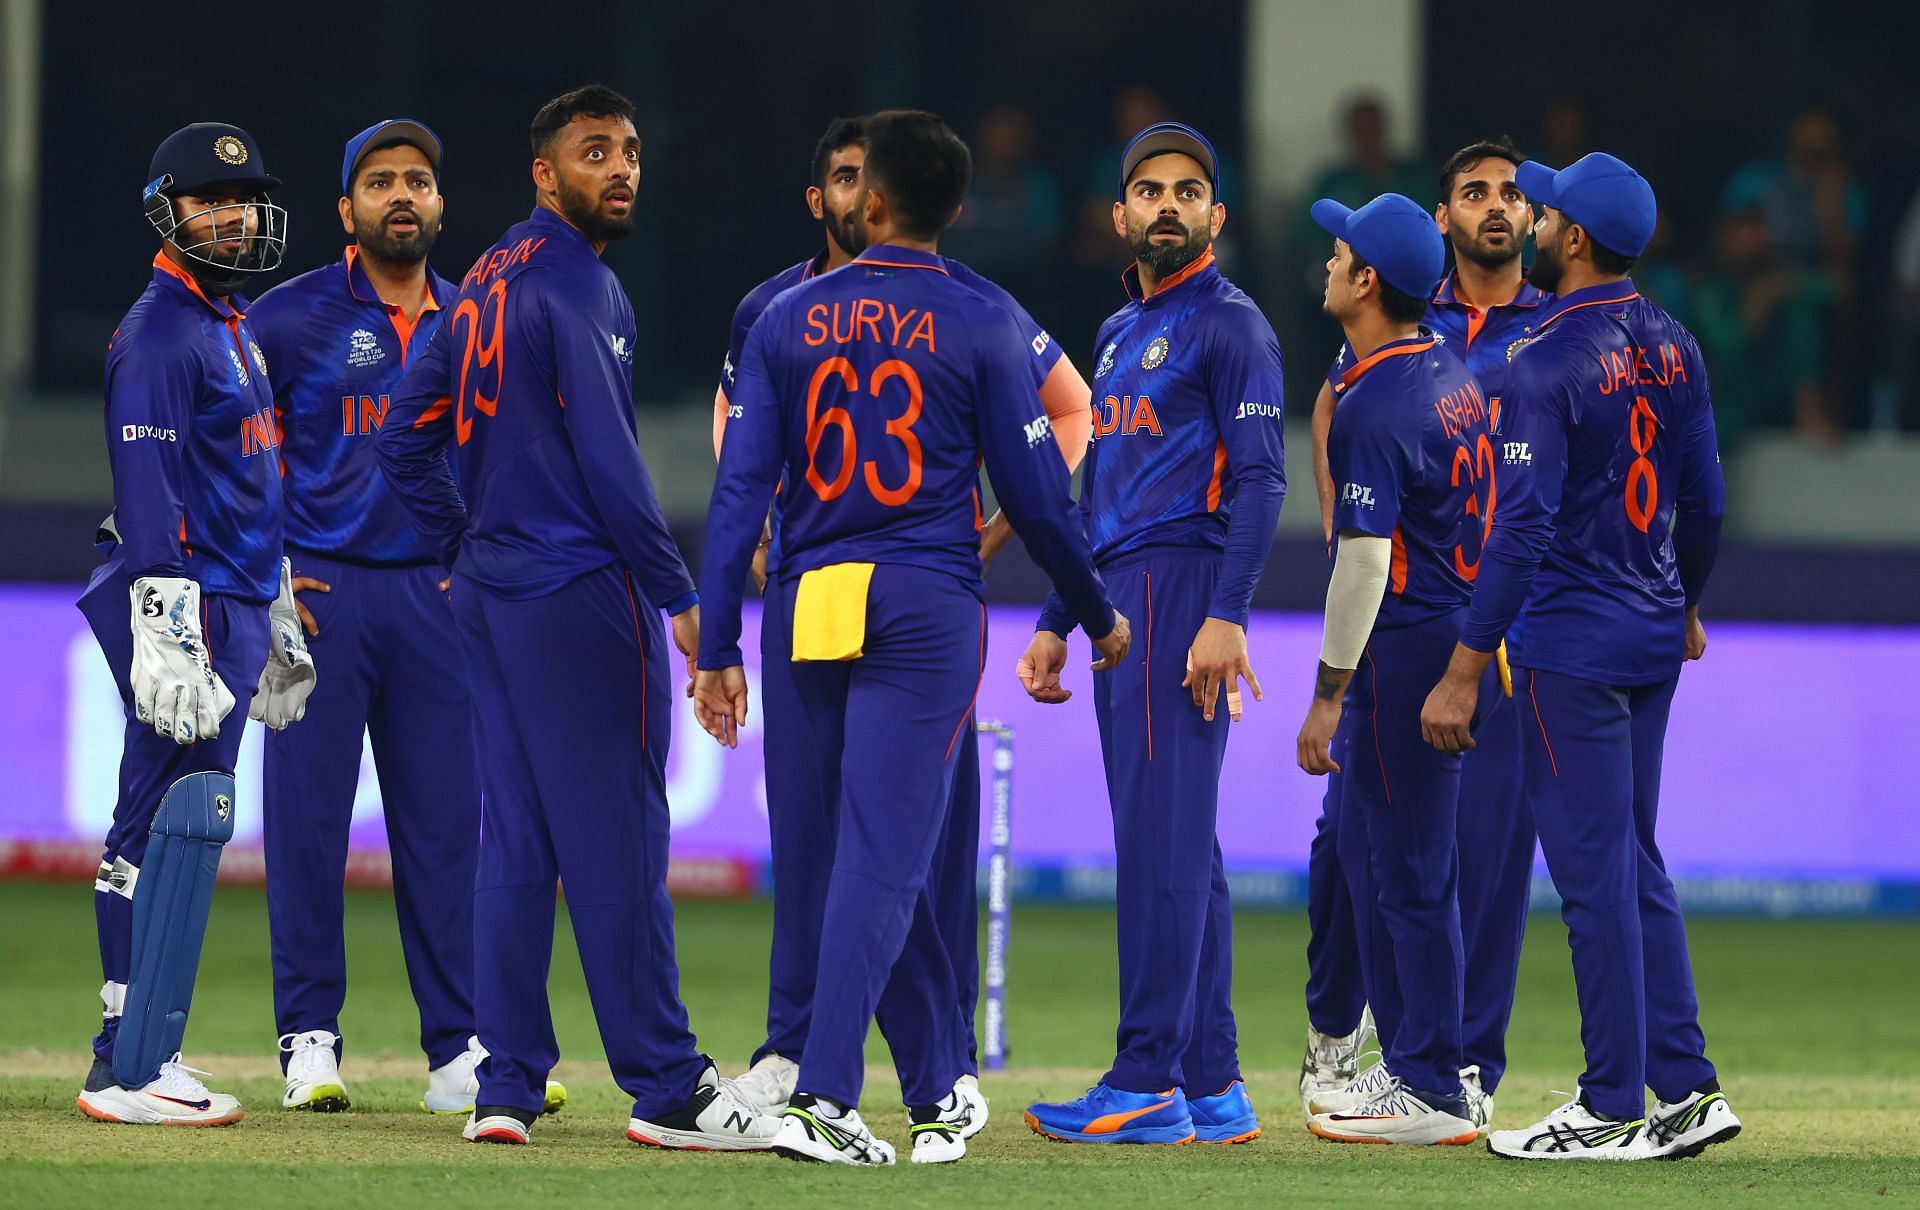 Team India failed to make the semi-finals of the T20 World Cup 2021